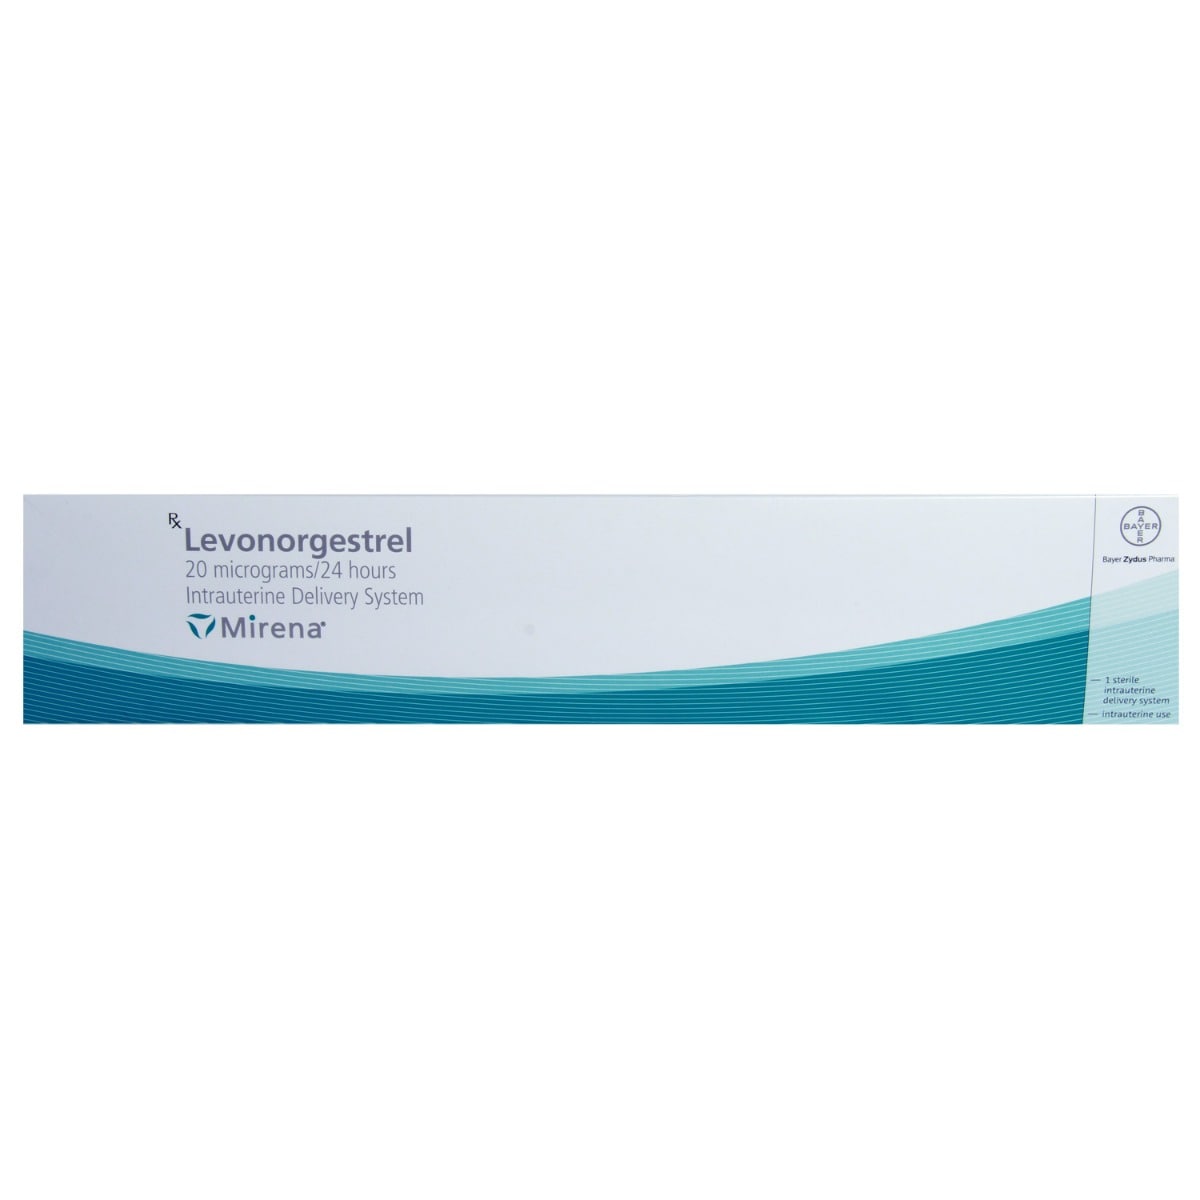 MIRENA LEVONORGESTREL, Pack of 1 INJECTION